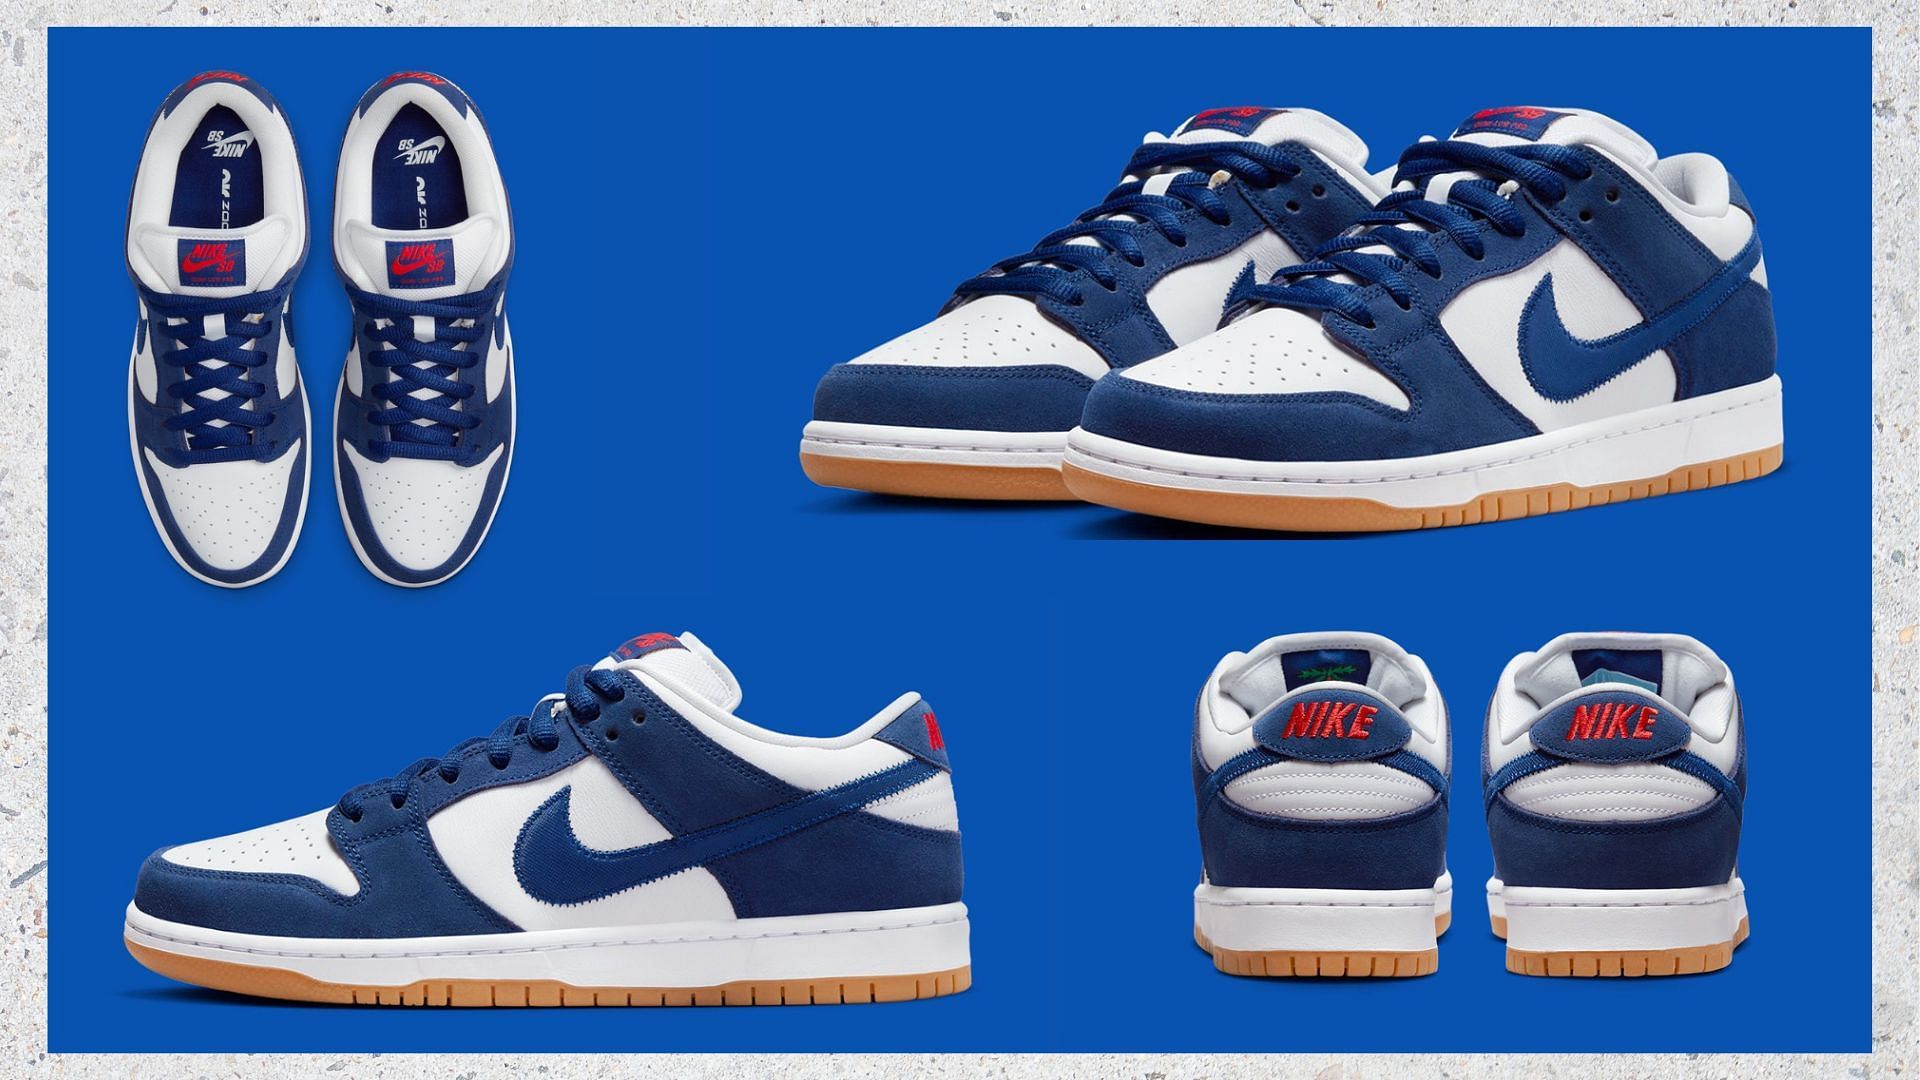 Where to buy Nike SB Dunk Low Dodgers shoes? Price and more